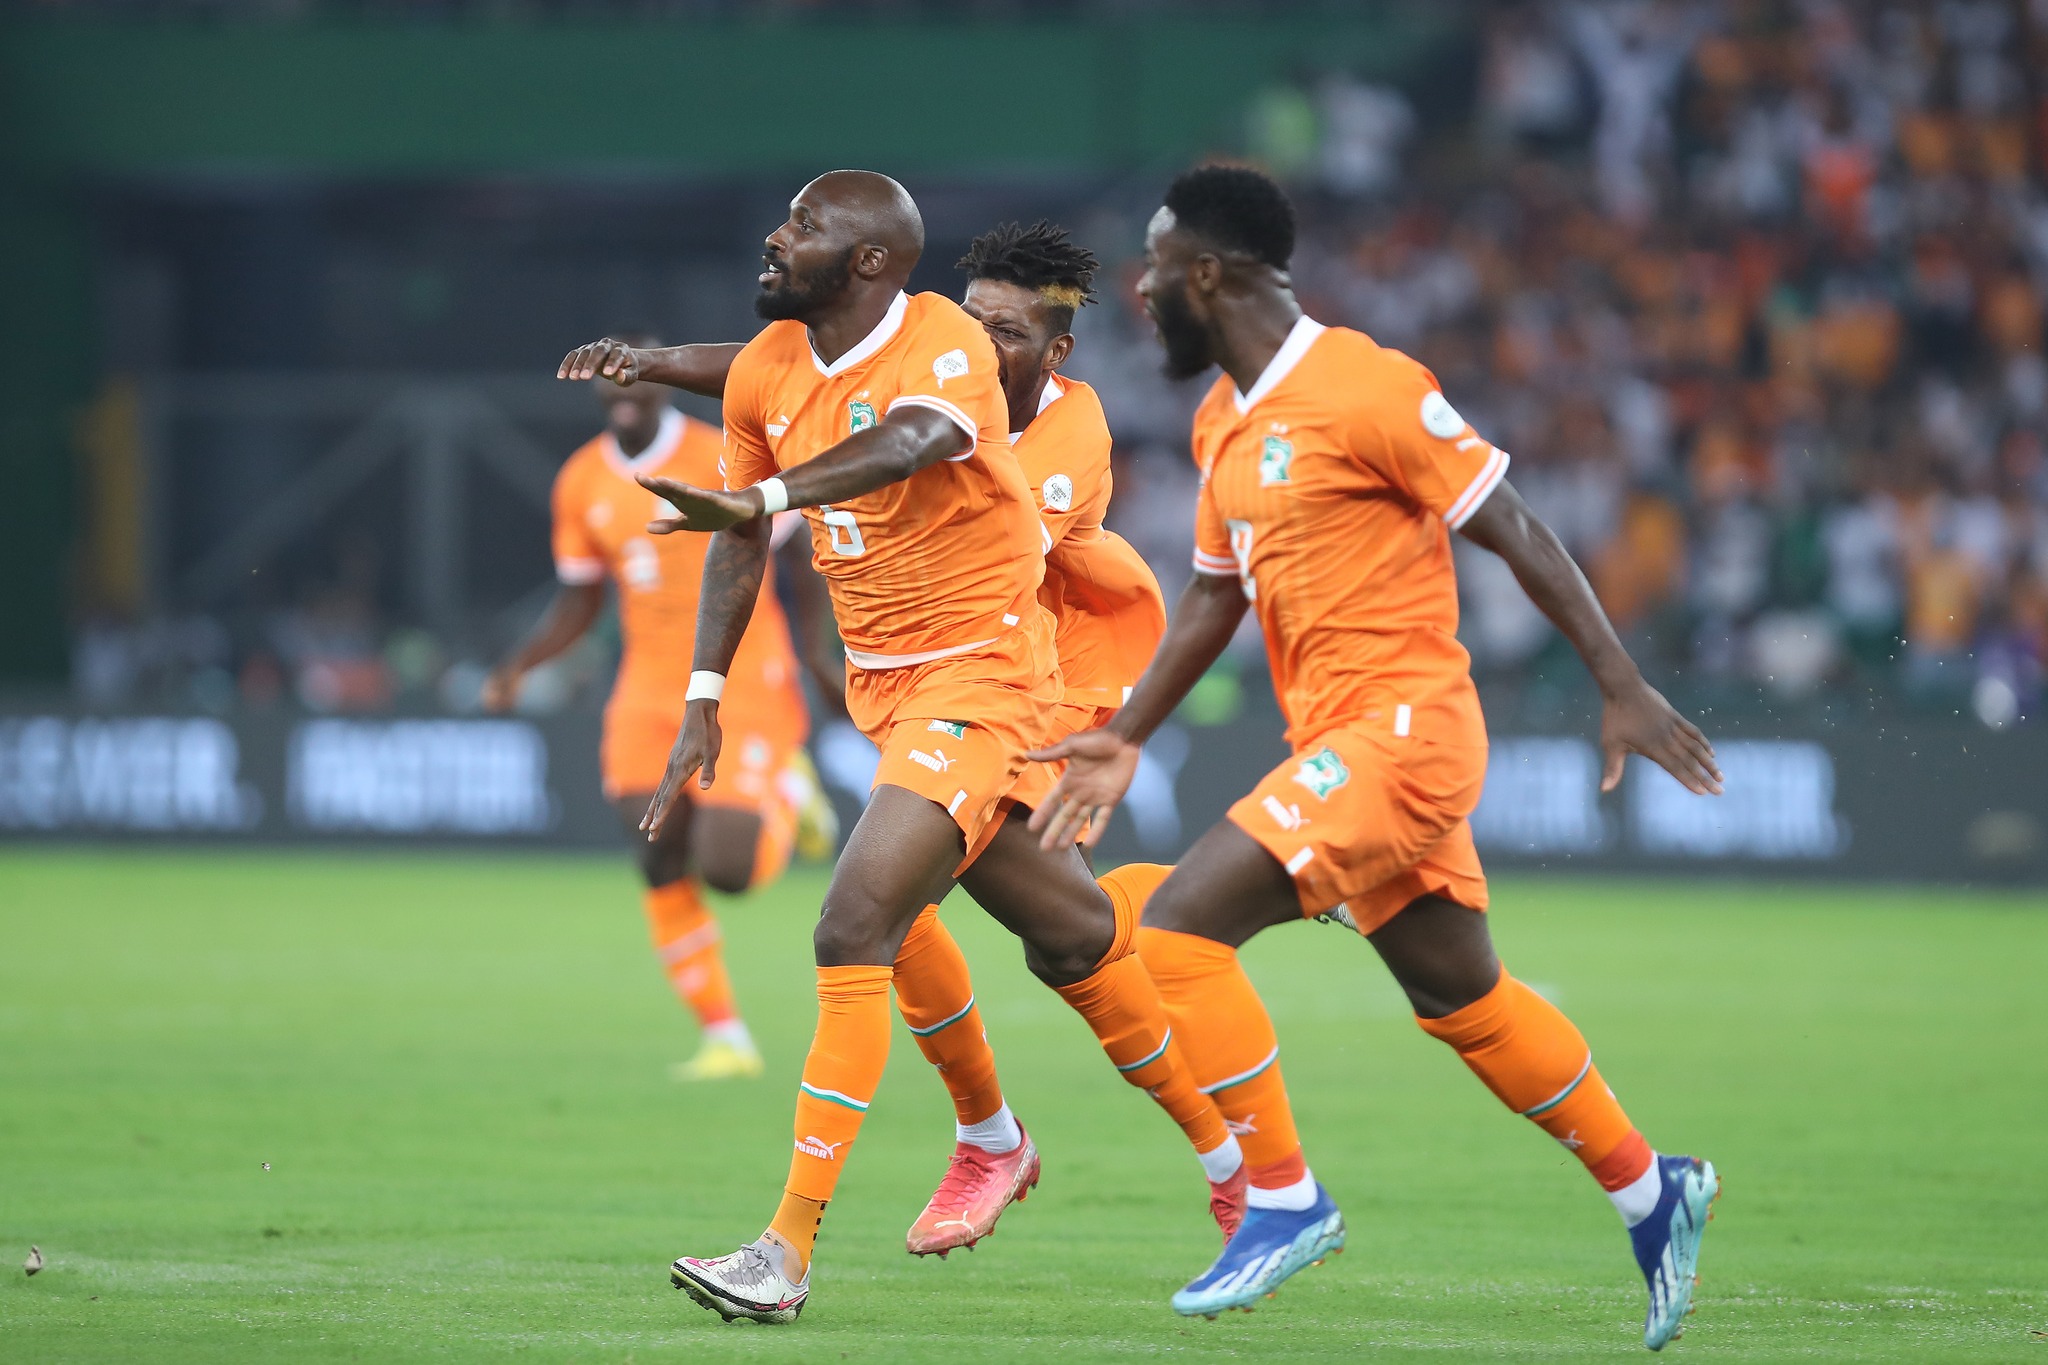 AFCON 23: Cote d'Ivoire beat Guinea Bissau to launch party time at Africa Cup of Nations